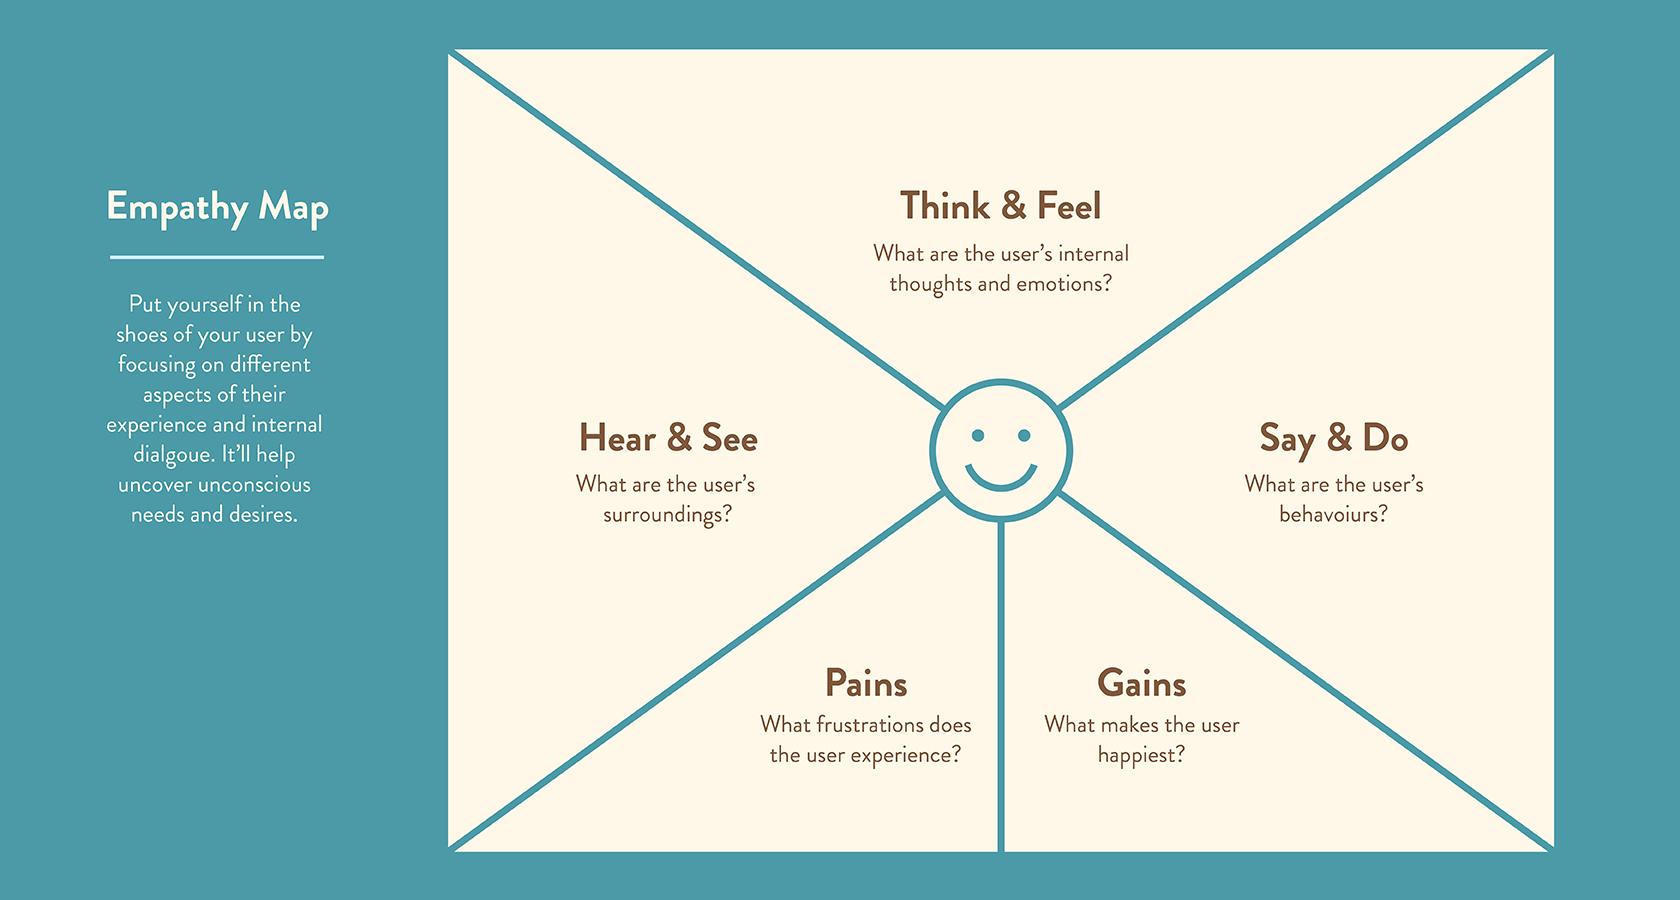 Empathy maps are a tool for design problem-solving